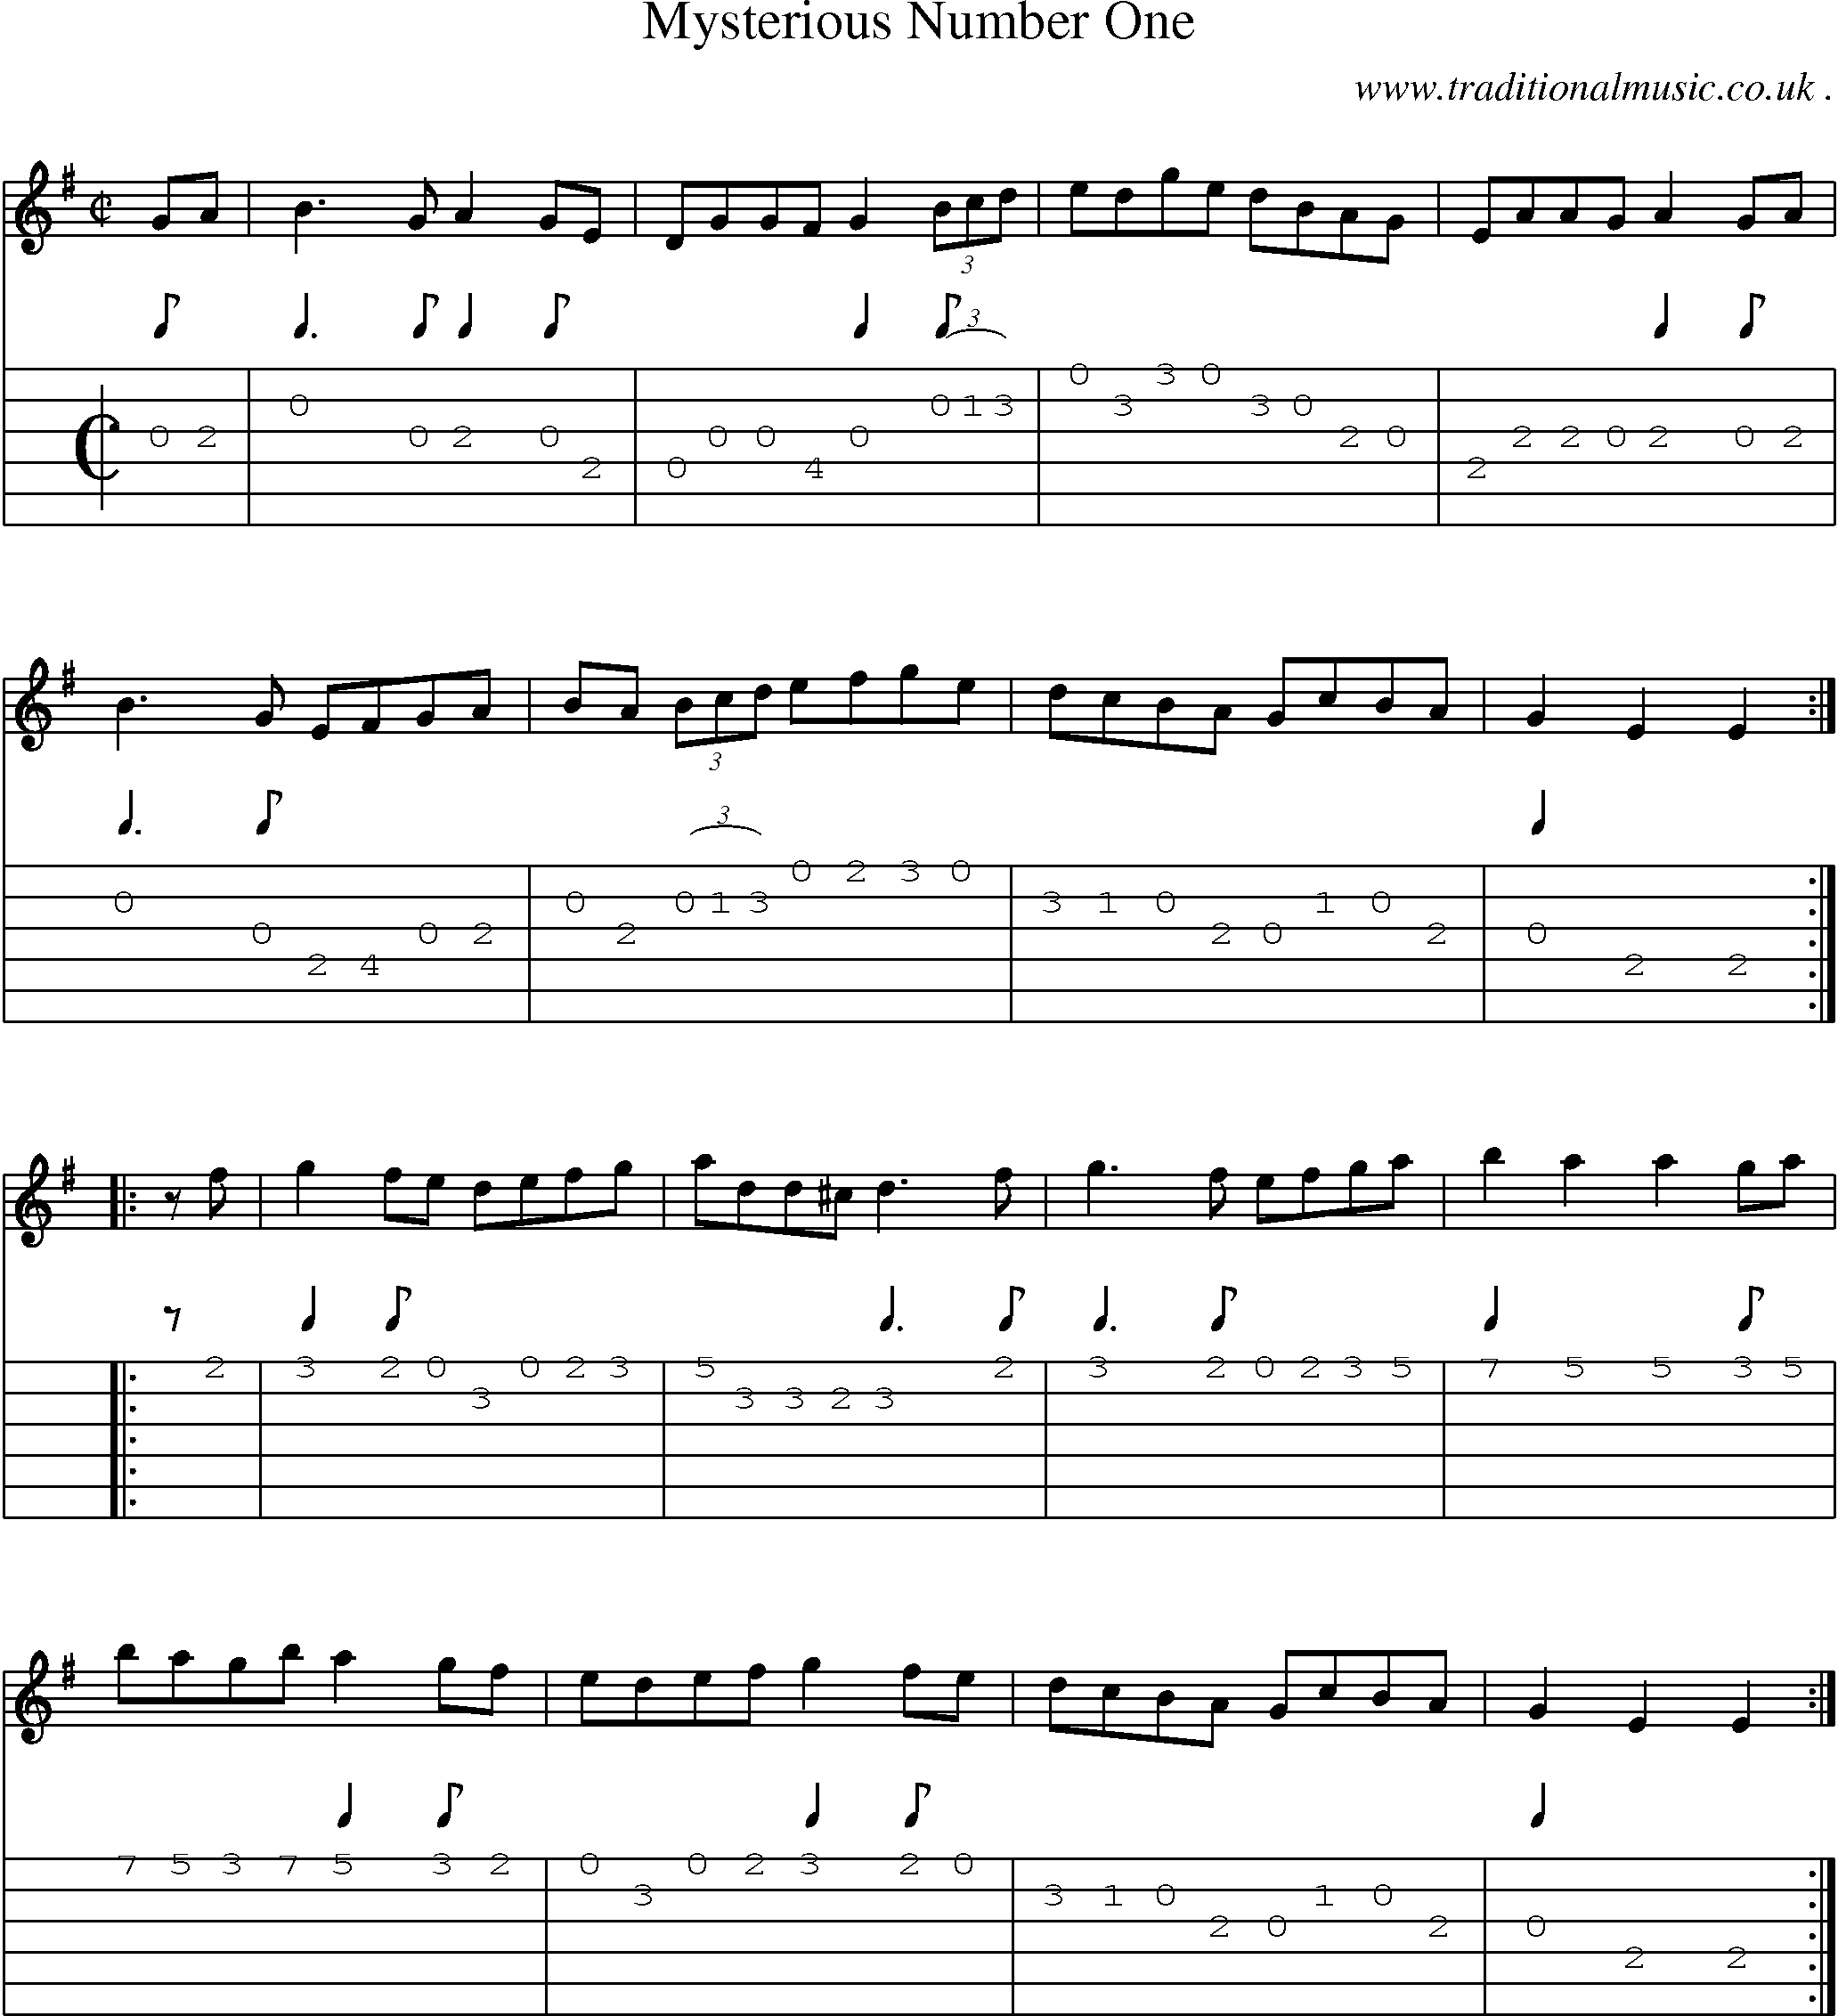 Sheet-Music and Guitar Tabs for Mysterious Number One